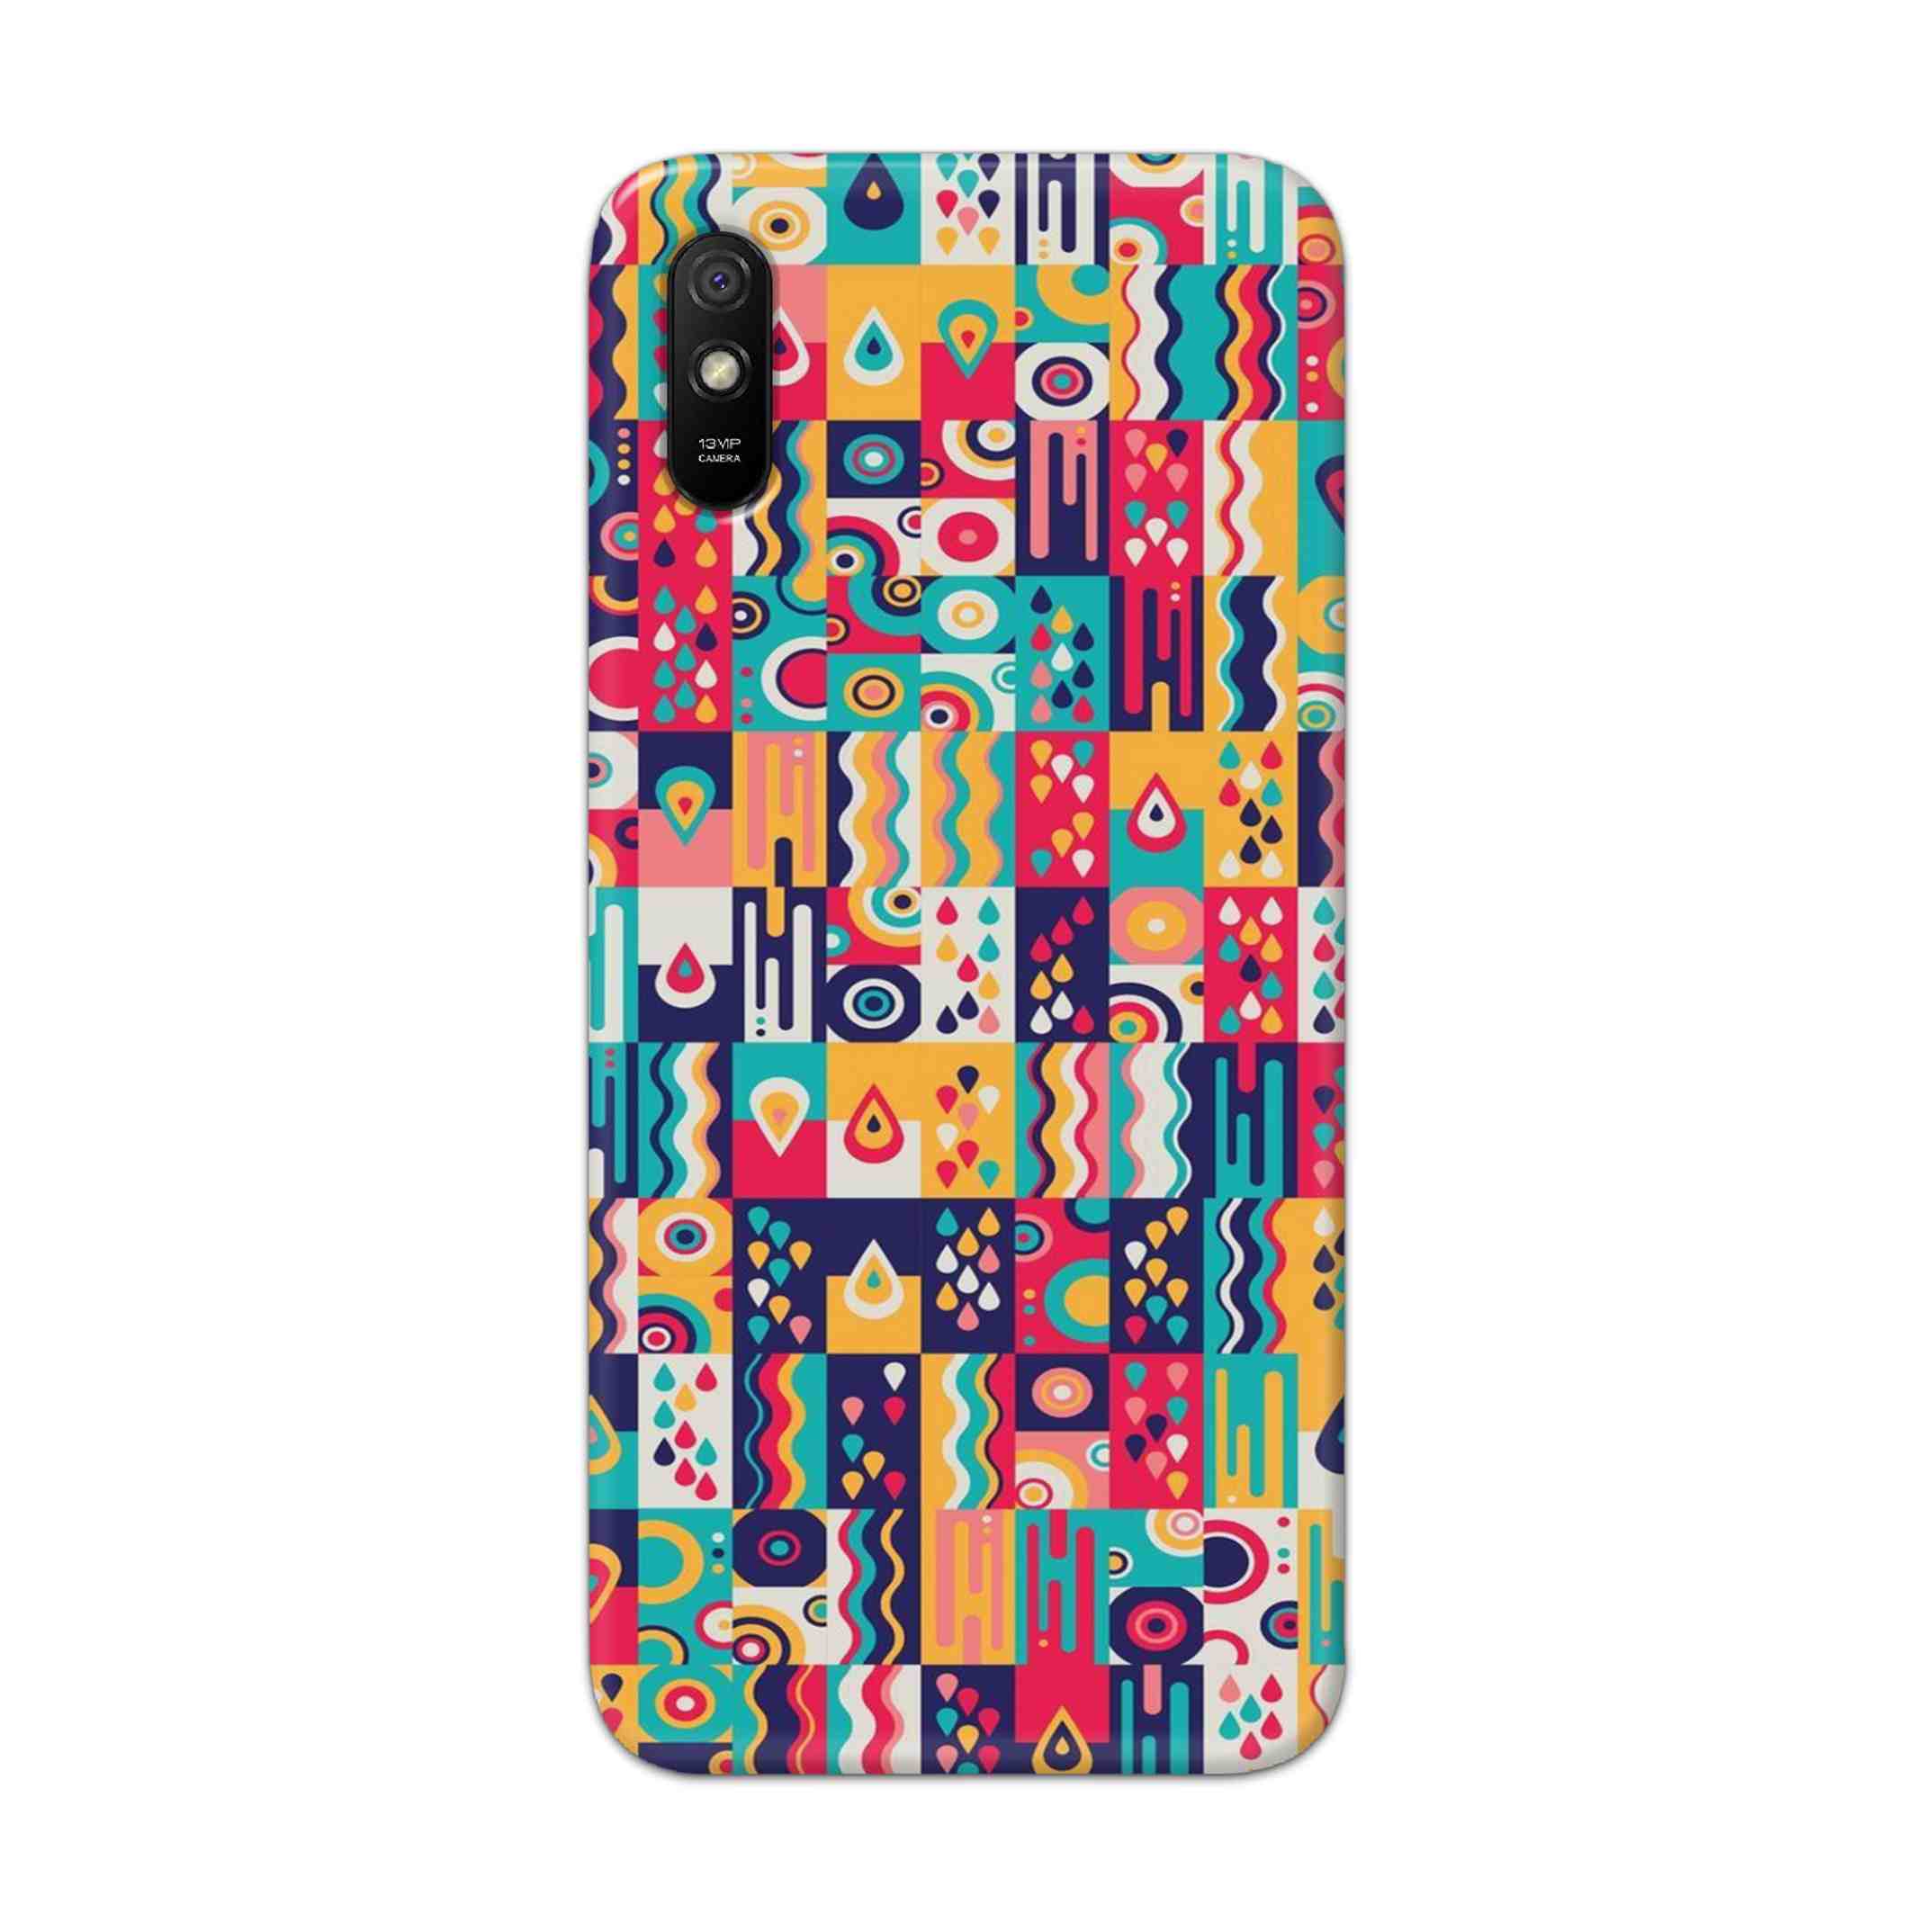 Buy Art Hard Back Mobile Phone Case Cover For Redmi 9A Online